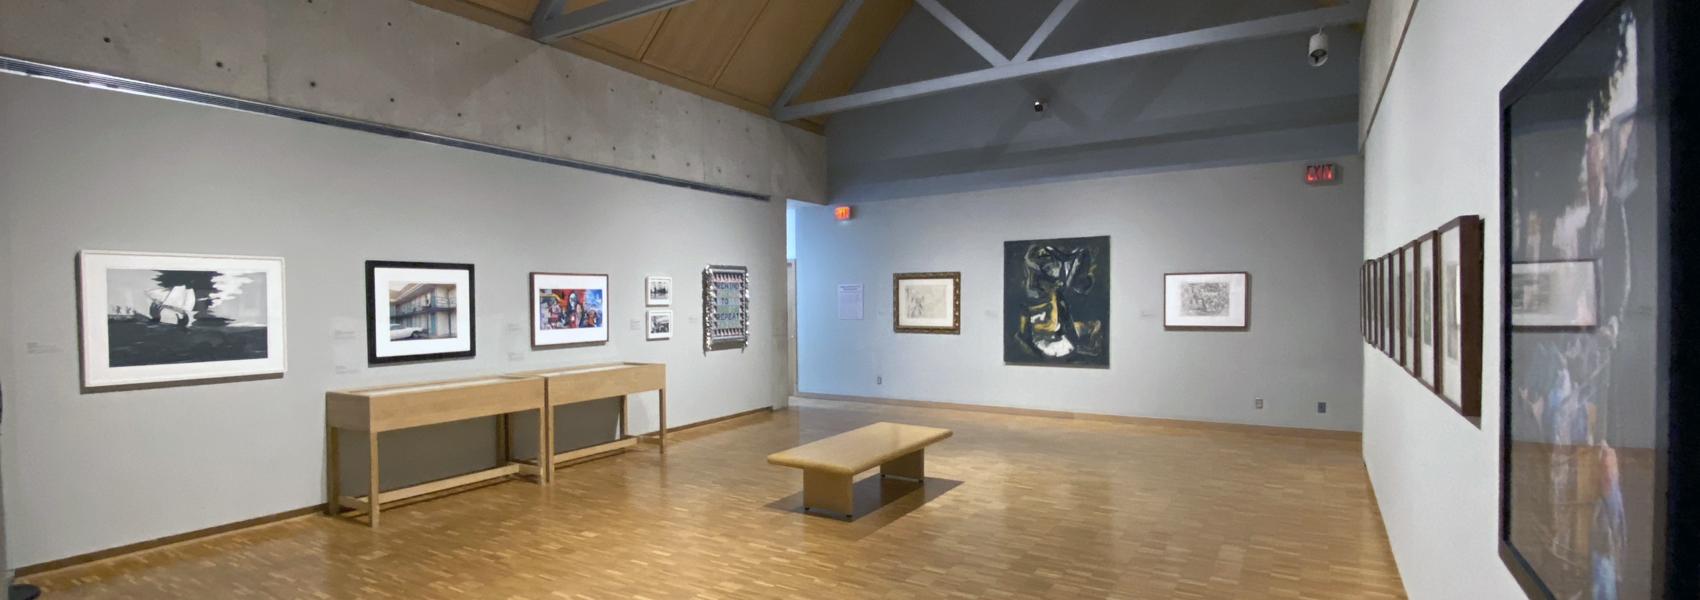 Haggerty Museum of Art Teaching Gallery Marquette